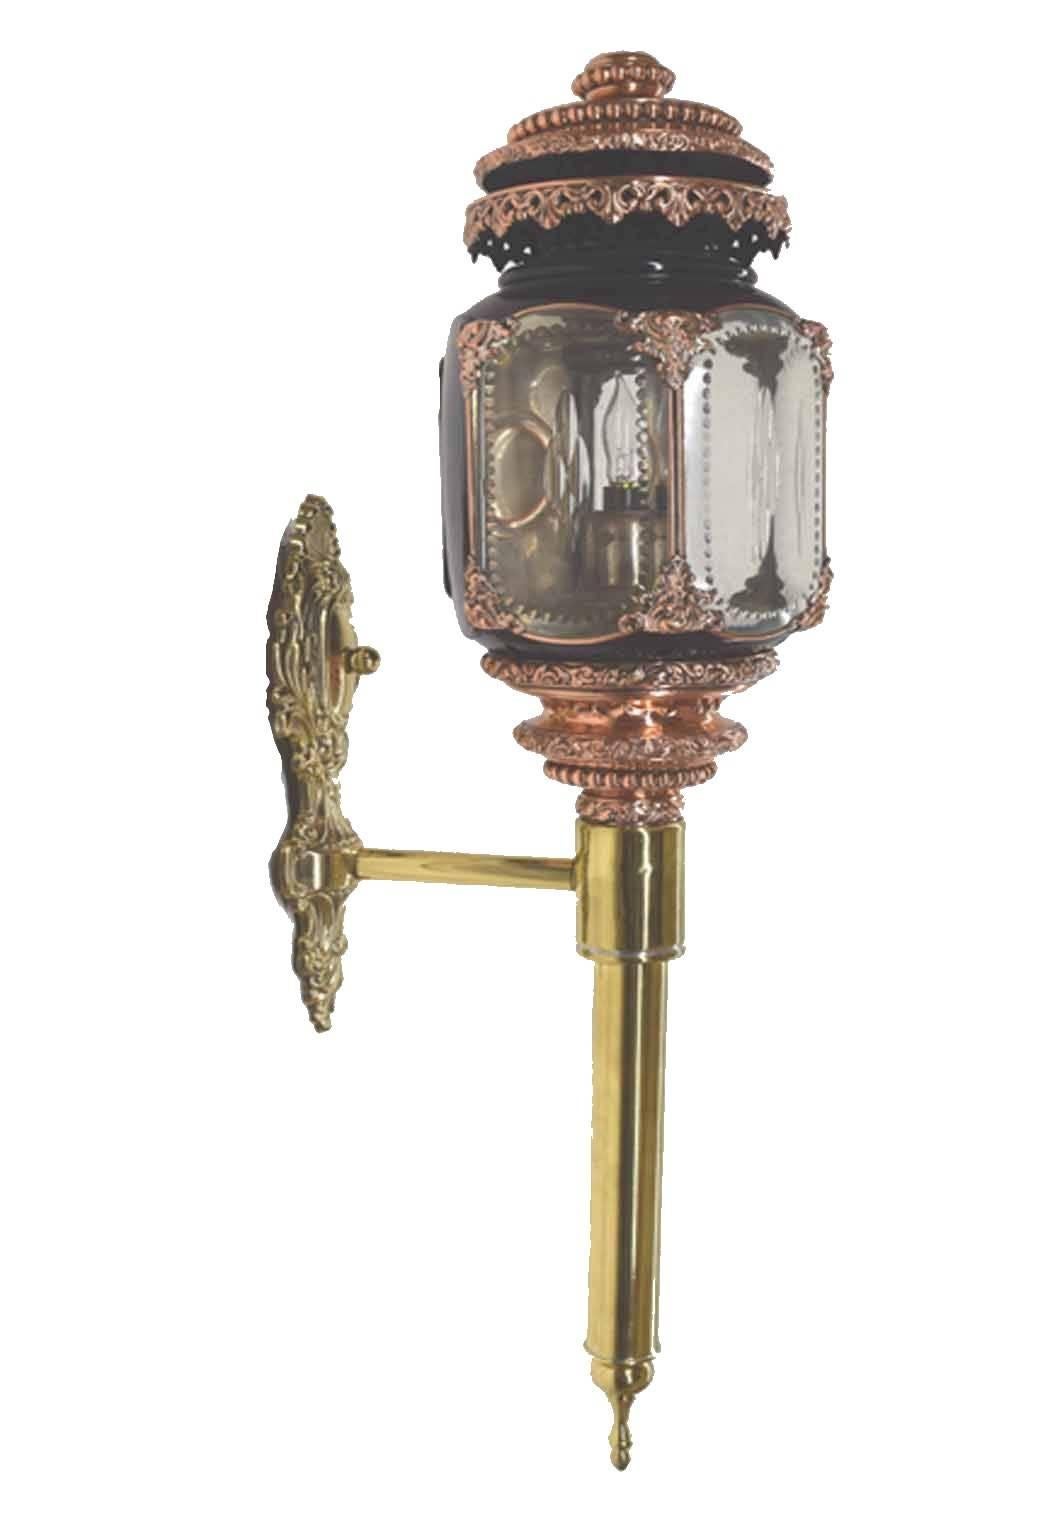 Antique English brass, copper and black tole peinte carriage lamps of large size; topped by a copper dome over a hexagonal cut and beveled glass nickel silvered light cage, over a floral repousse and beaded copper standard ending in a brass tapering